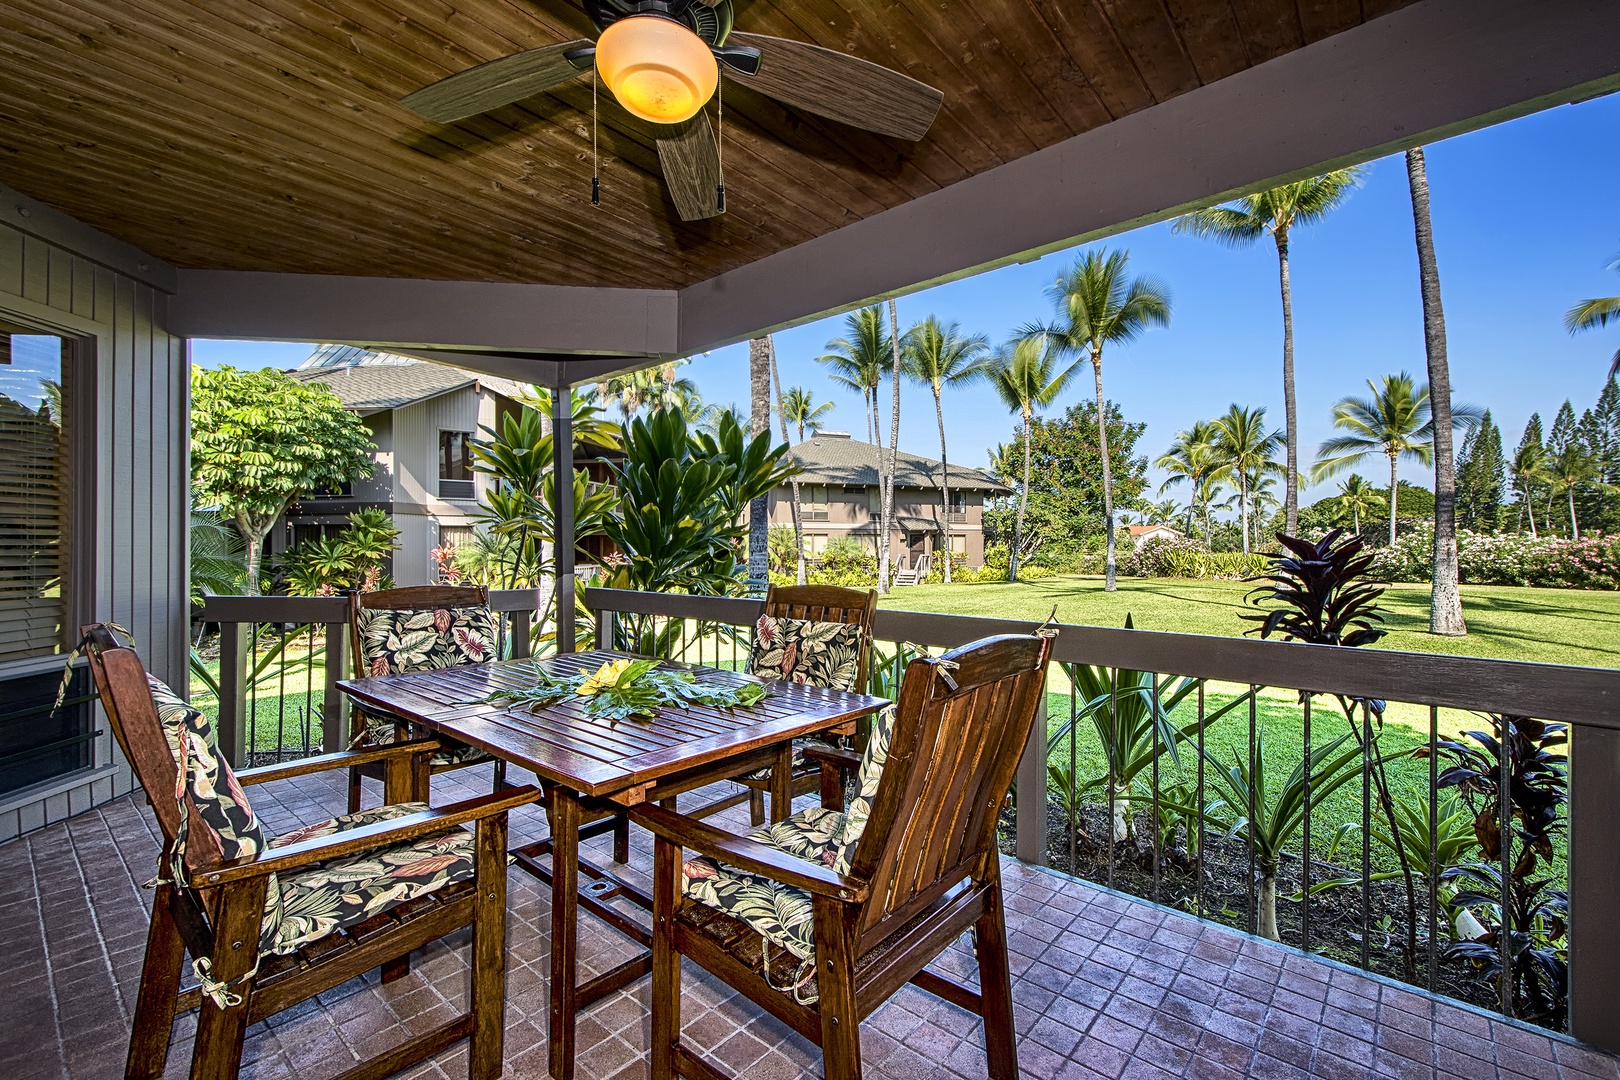 Kailua Kona Vacation Rentals, Kanaloa 701 - Spend your vacation at Hale Kalena which means "House of rest" in Hawaiian